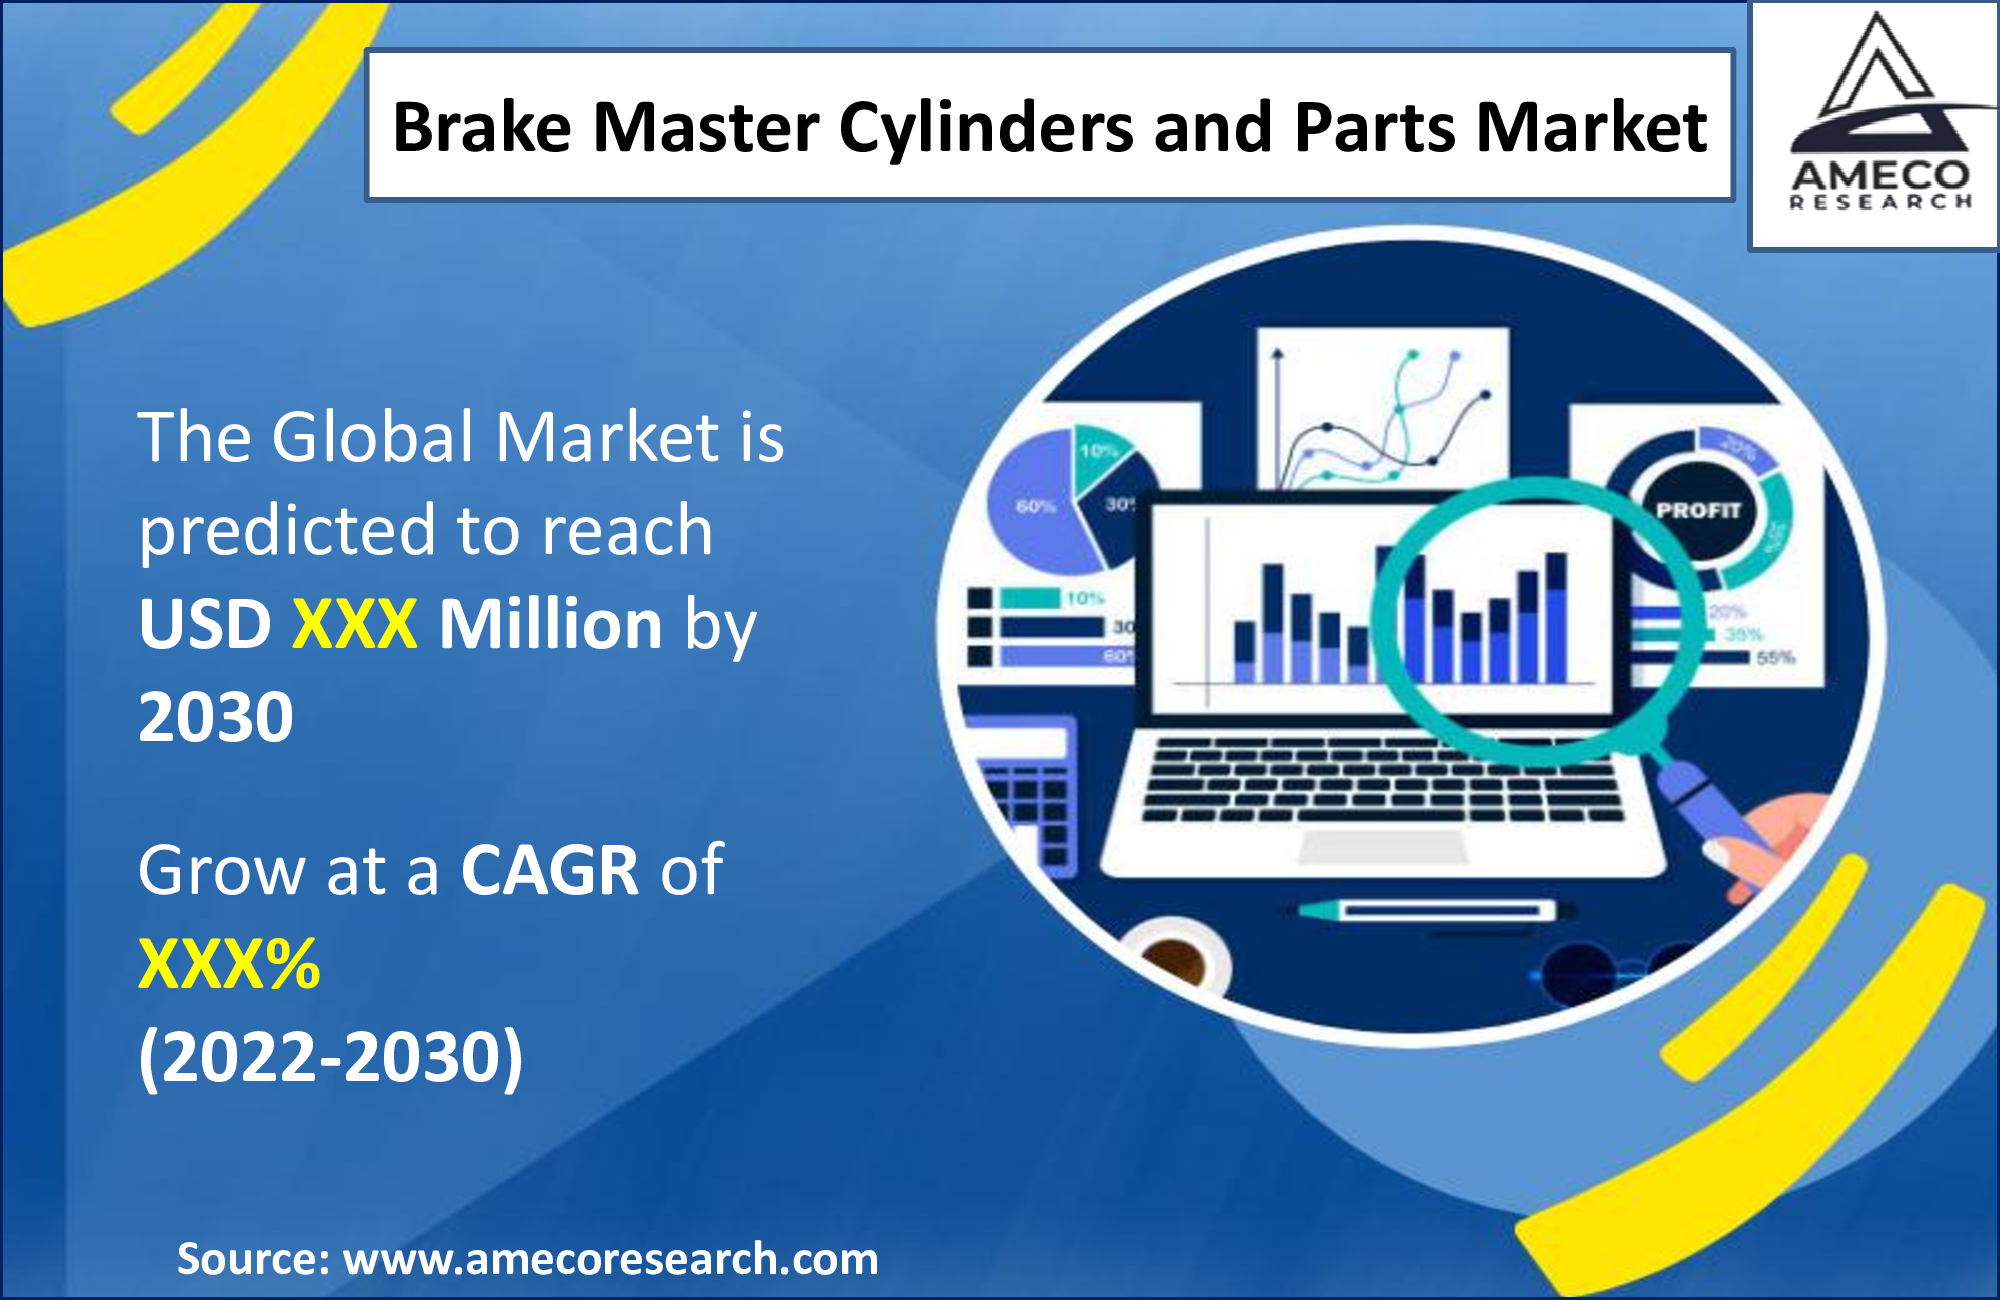 Brake Master Cylinders and Parts Market